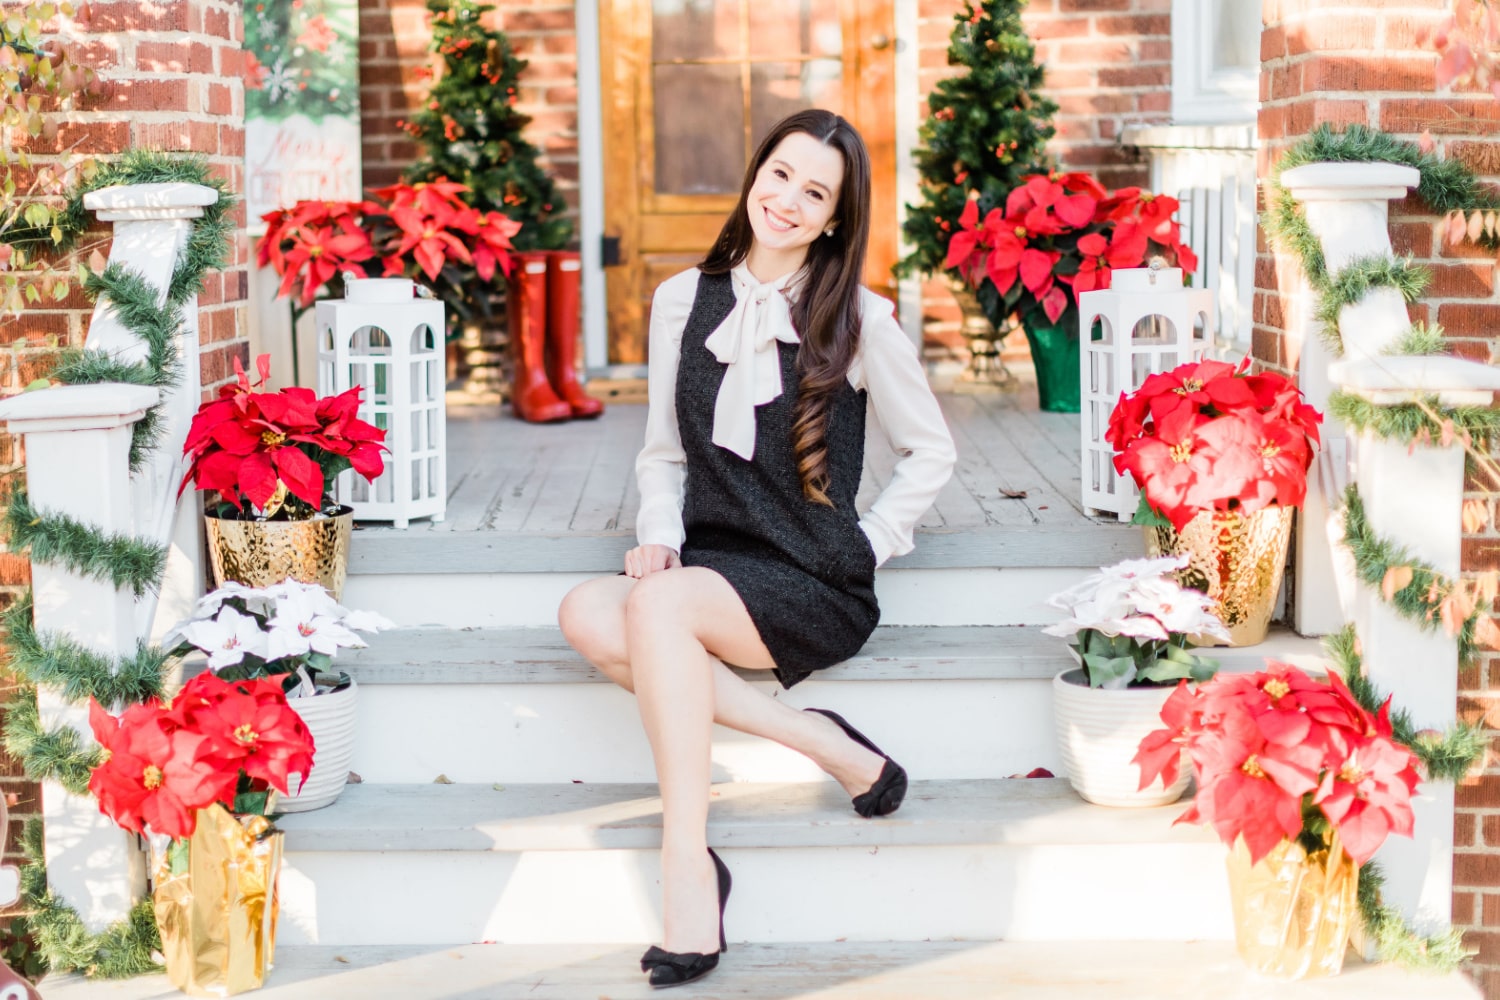 Affordable fashion blogger Stephanie Ziajka styles a black shift dress with a white tie-neck chiffon blouse and black pointed toe bow pumps on Diary of a Debutante